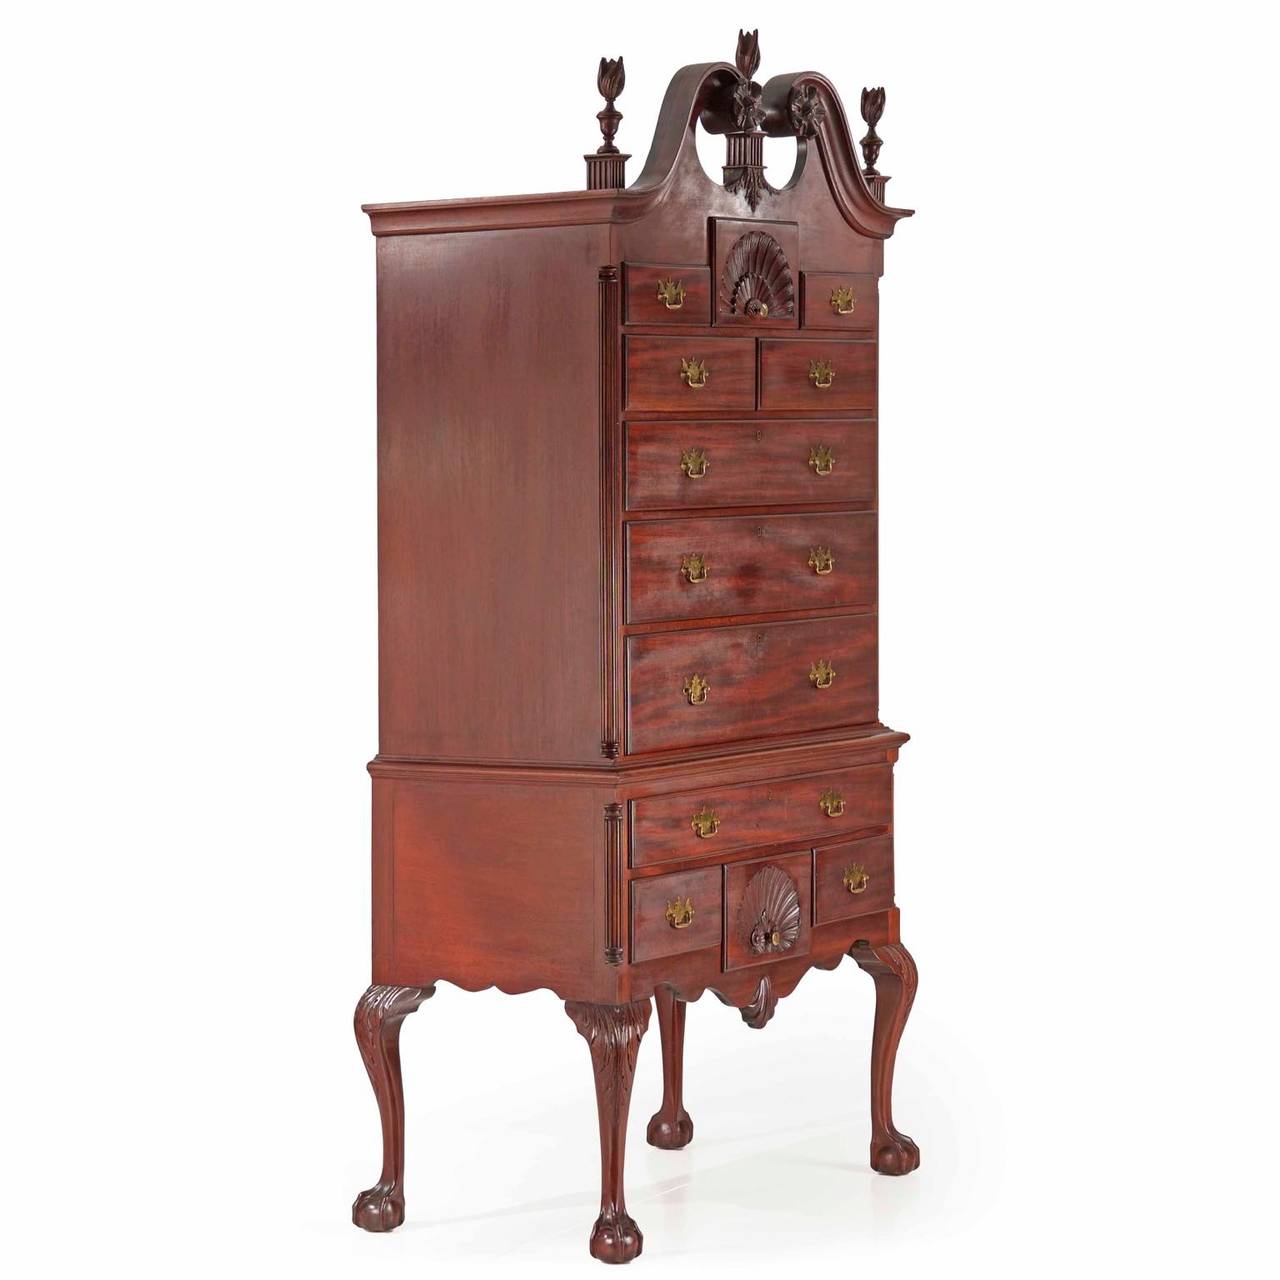 A finely hand crafted piece in the manner of the Philadelphia forms of the late 18th Century, this highboy was probably crafted shortly after the Centennial during the last years of the 19th century or possibly the first quarter of the 20th Century.